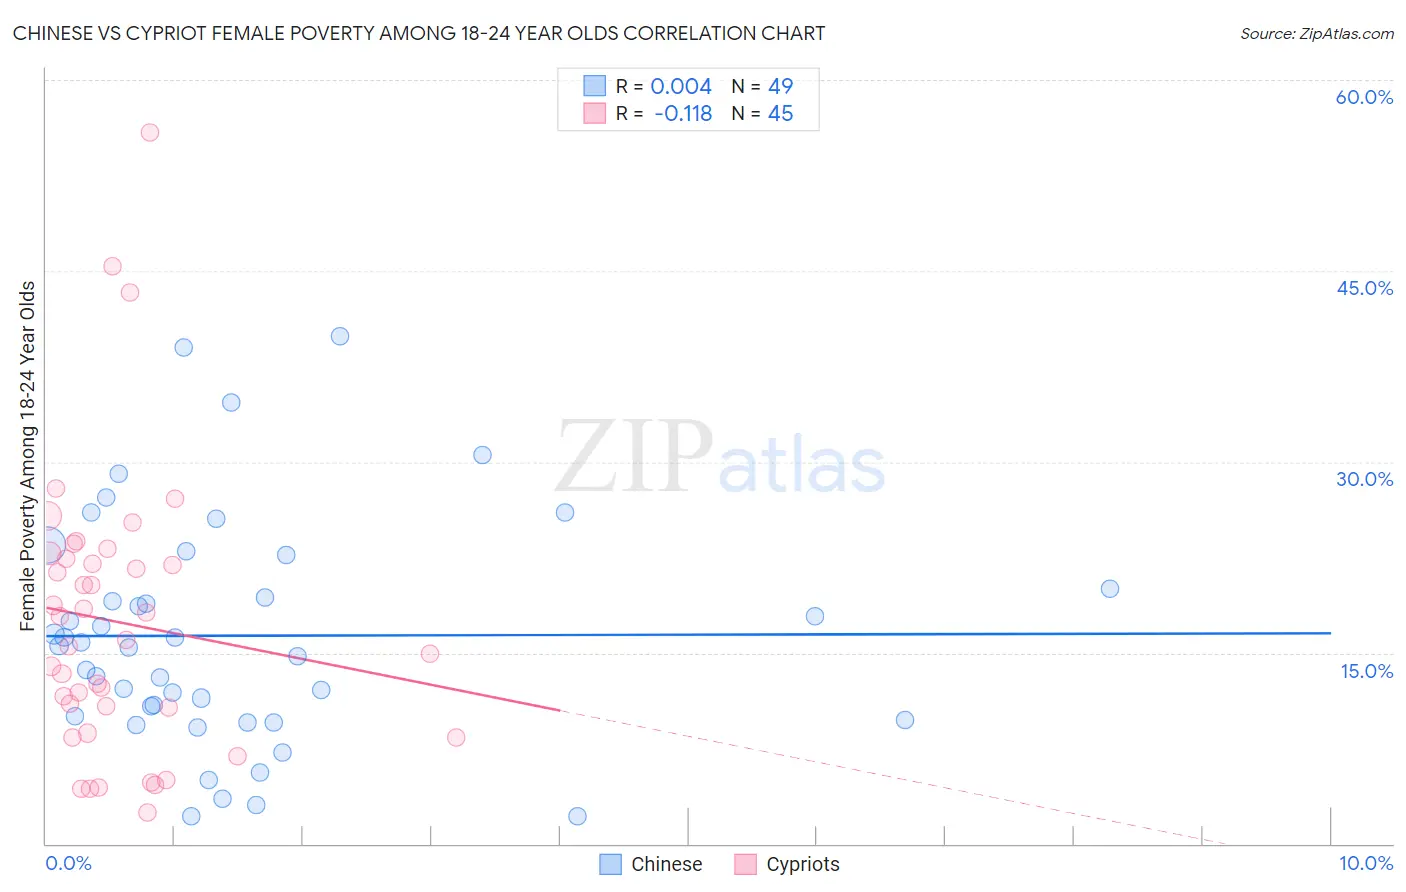 Chinese vs Cypriot Female Poverty Among 18-24 Year Olds